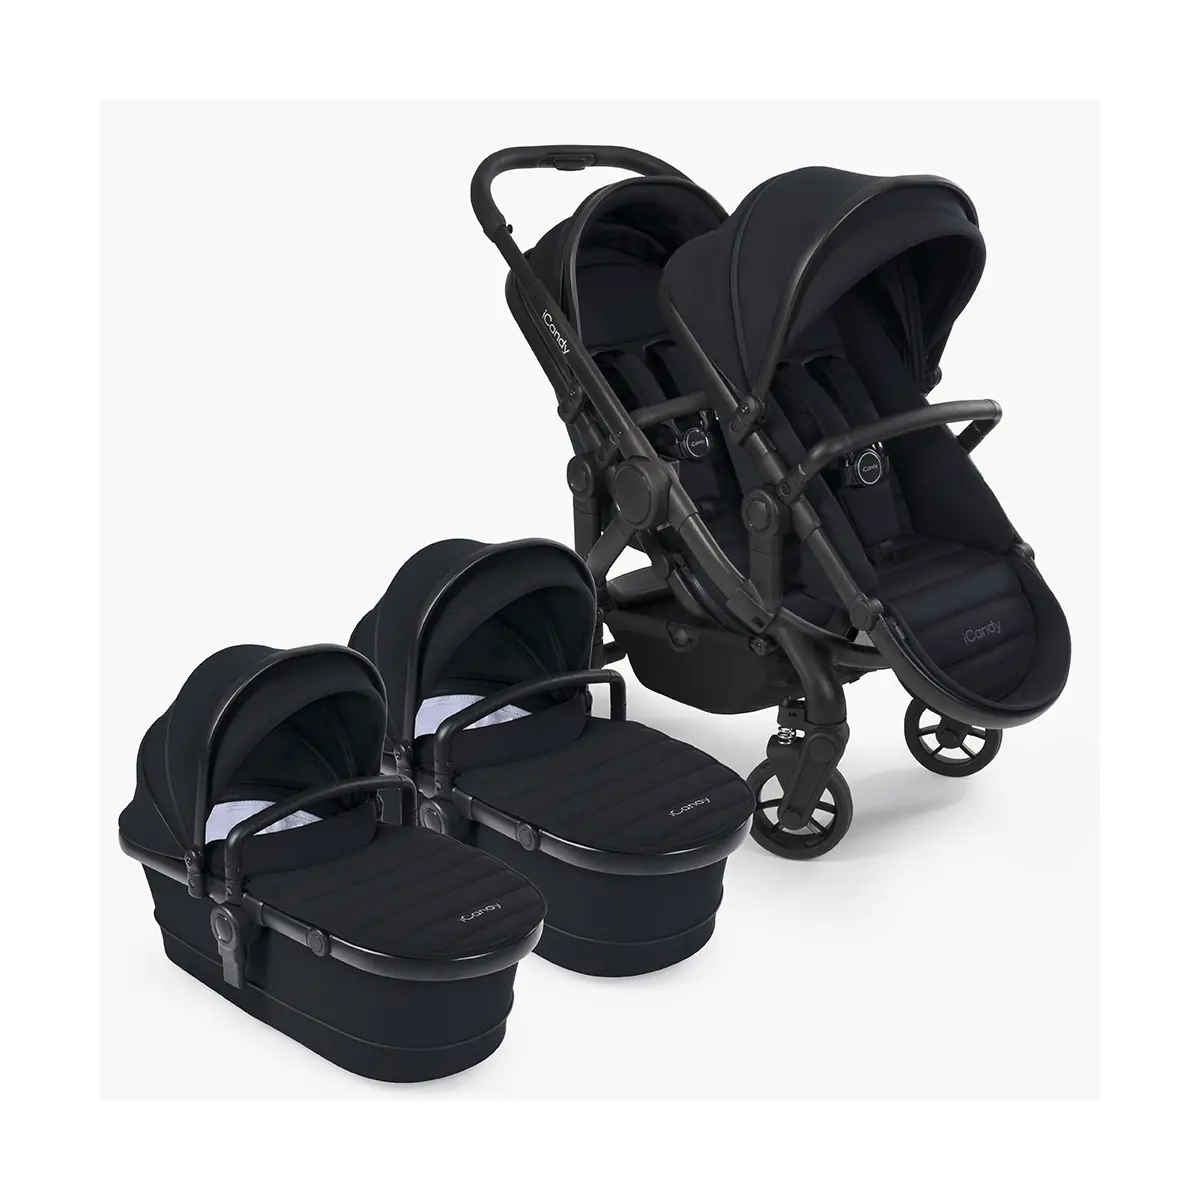 Image of iCandy Peach 7 Twin Pushchair Bundle - Black Edition